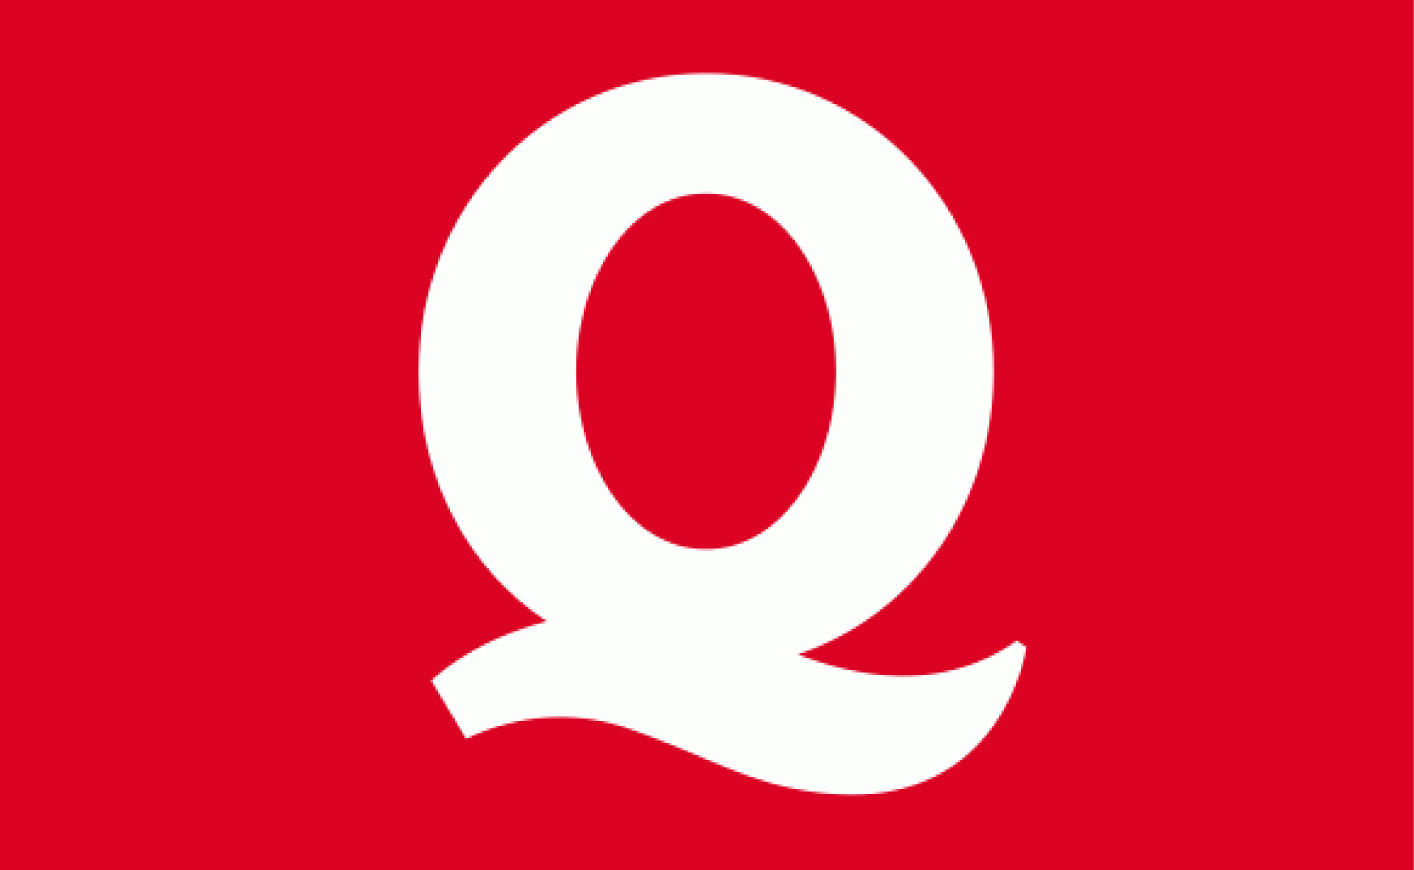 Quick Logo - Quick reveals its new logo and gets rid of his roof after 22 years